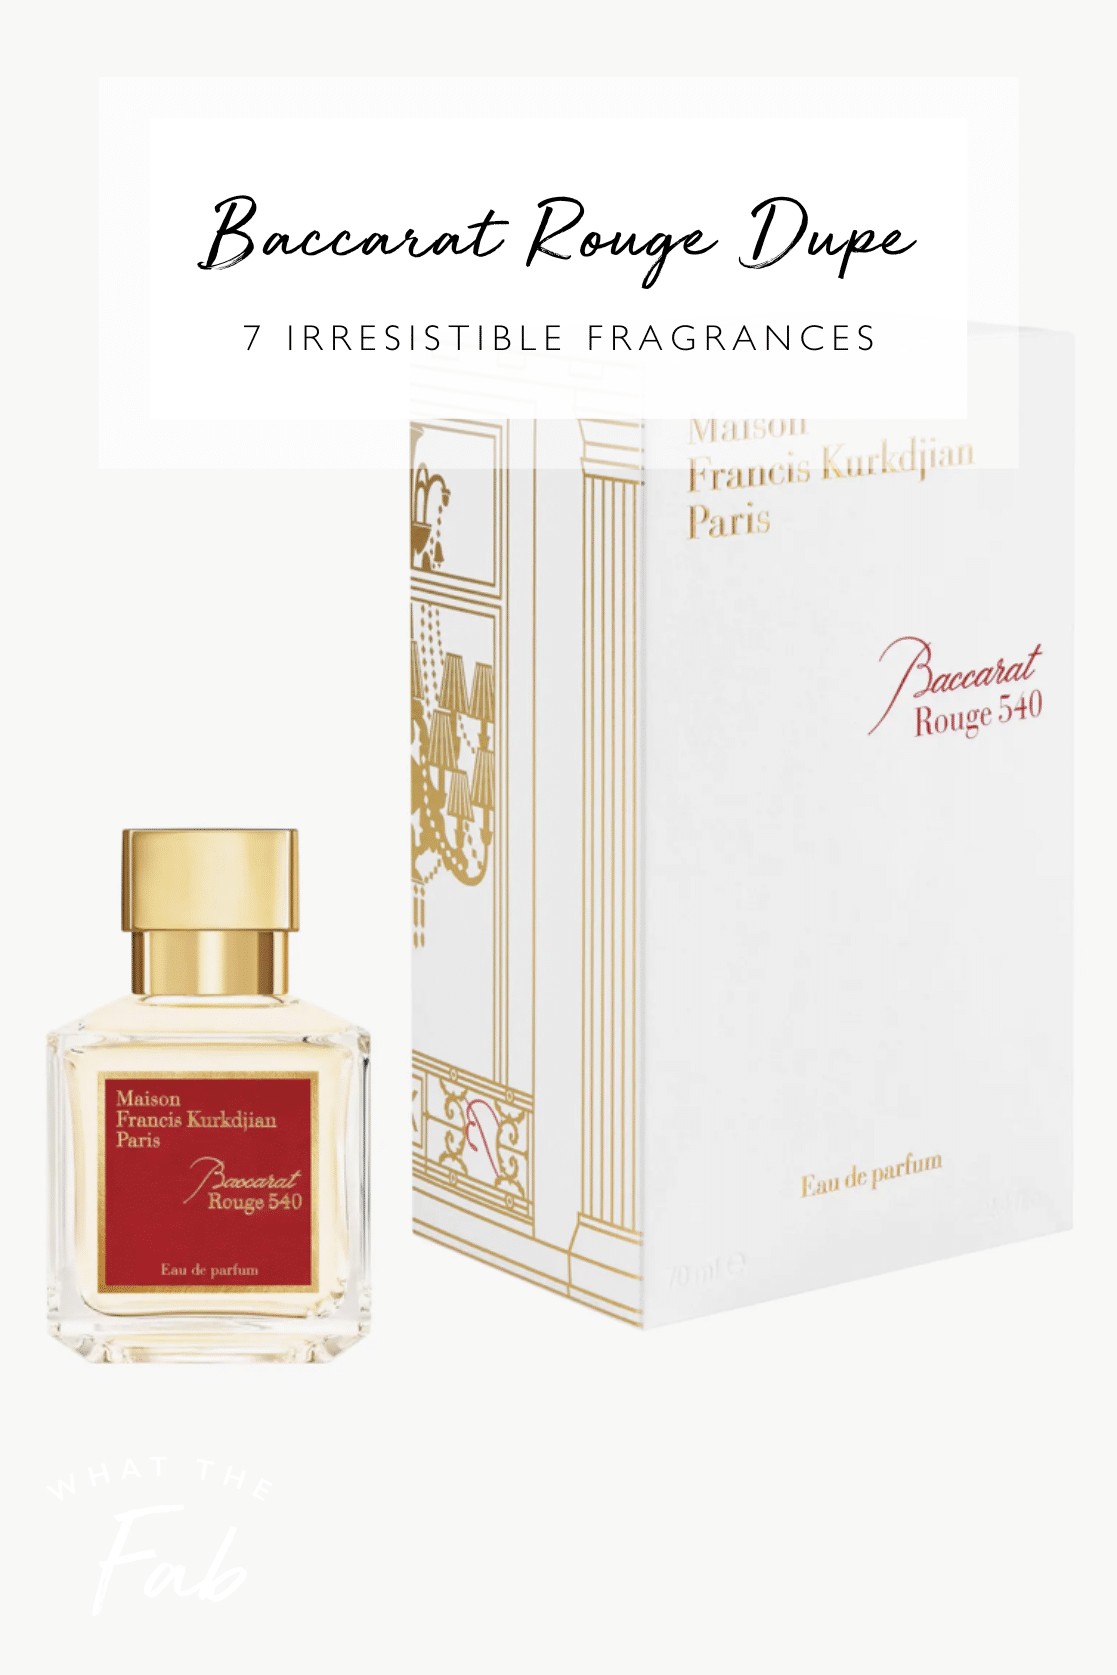 Baccarat Rouge dupe fragrances, by beauty blogger What The Fab